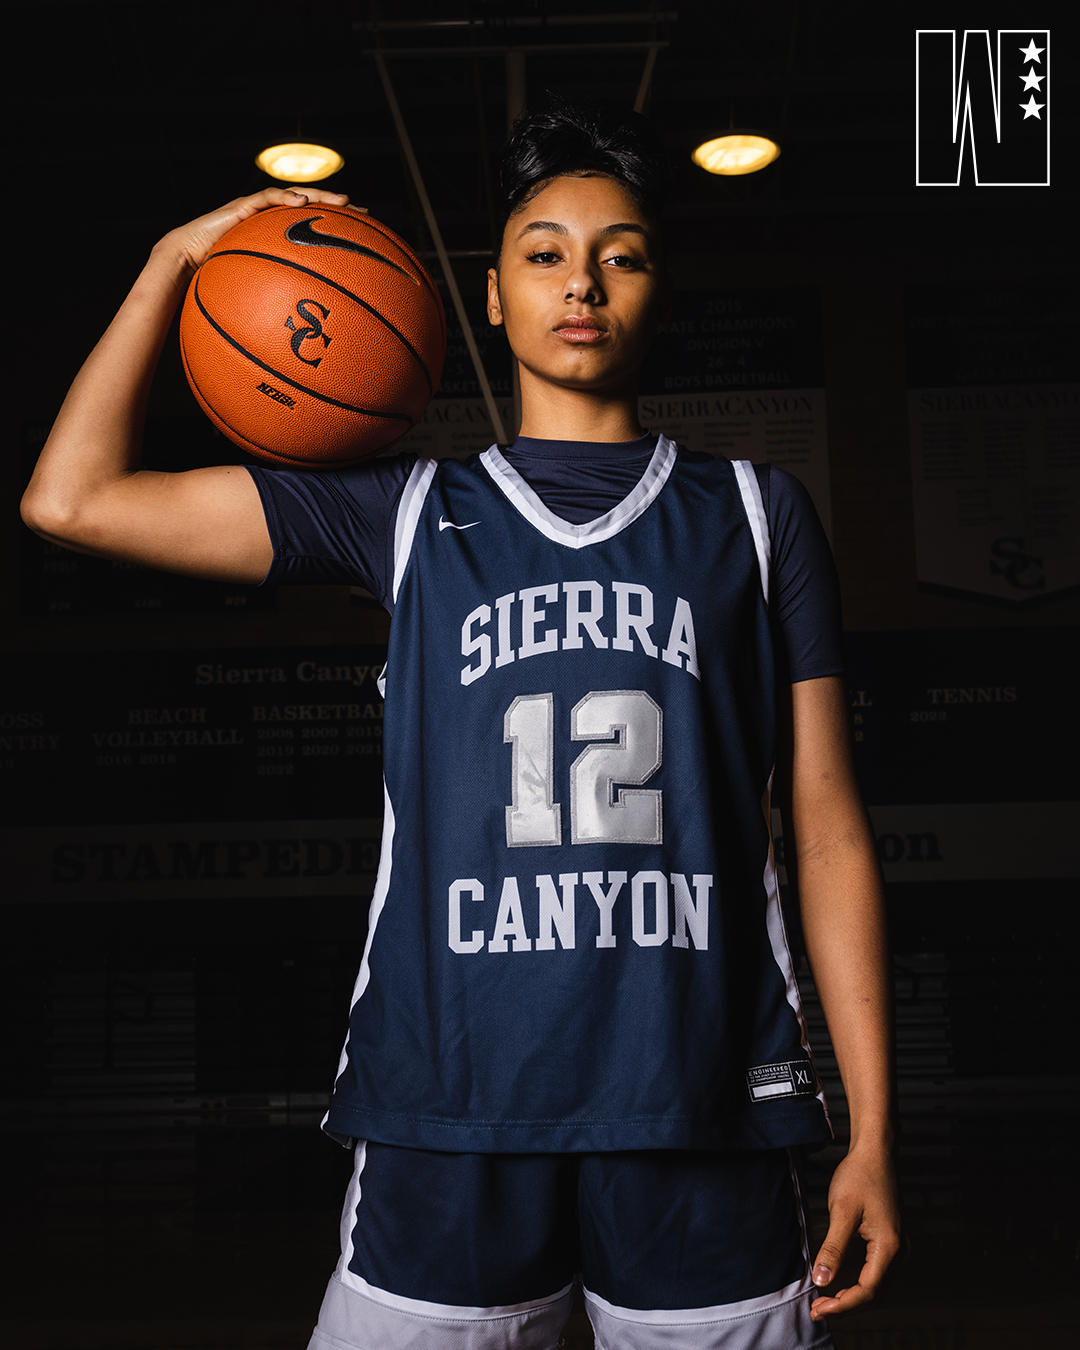 The Rise of Sierra Canyon’s Judea “Juju” Watkins into the National Player of the Year